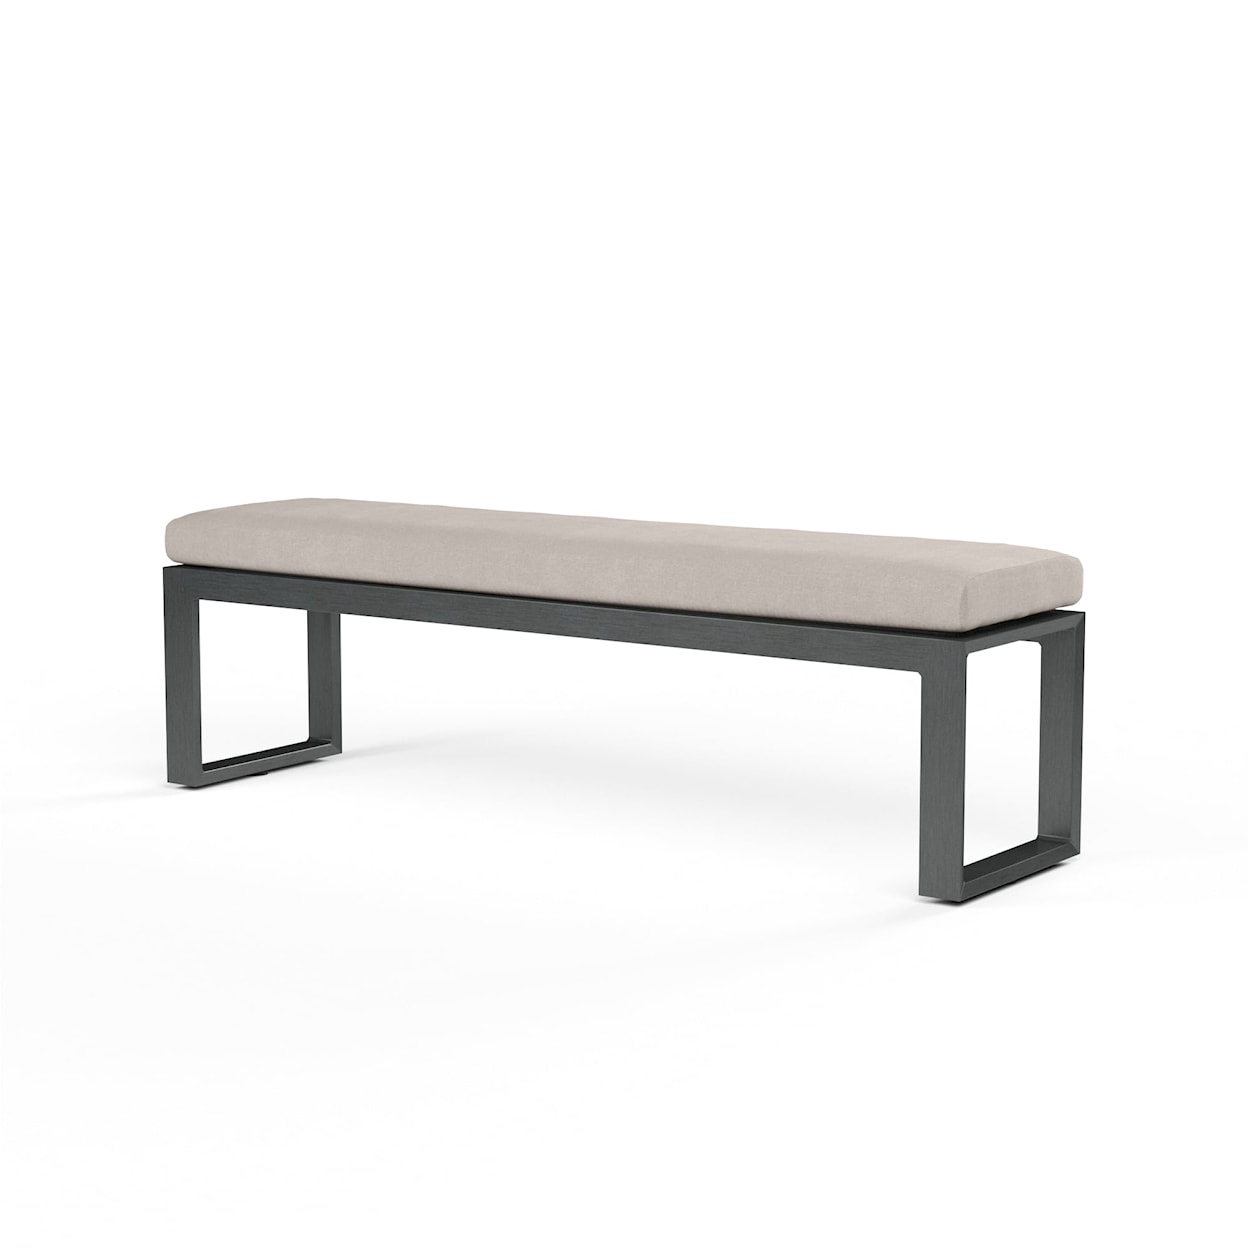 Sunset West Redondo Outdoor Dining Bench